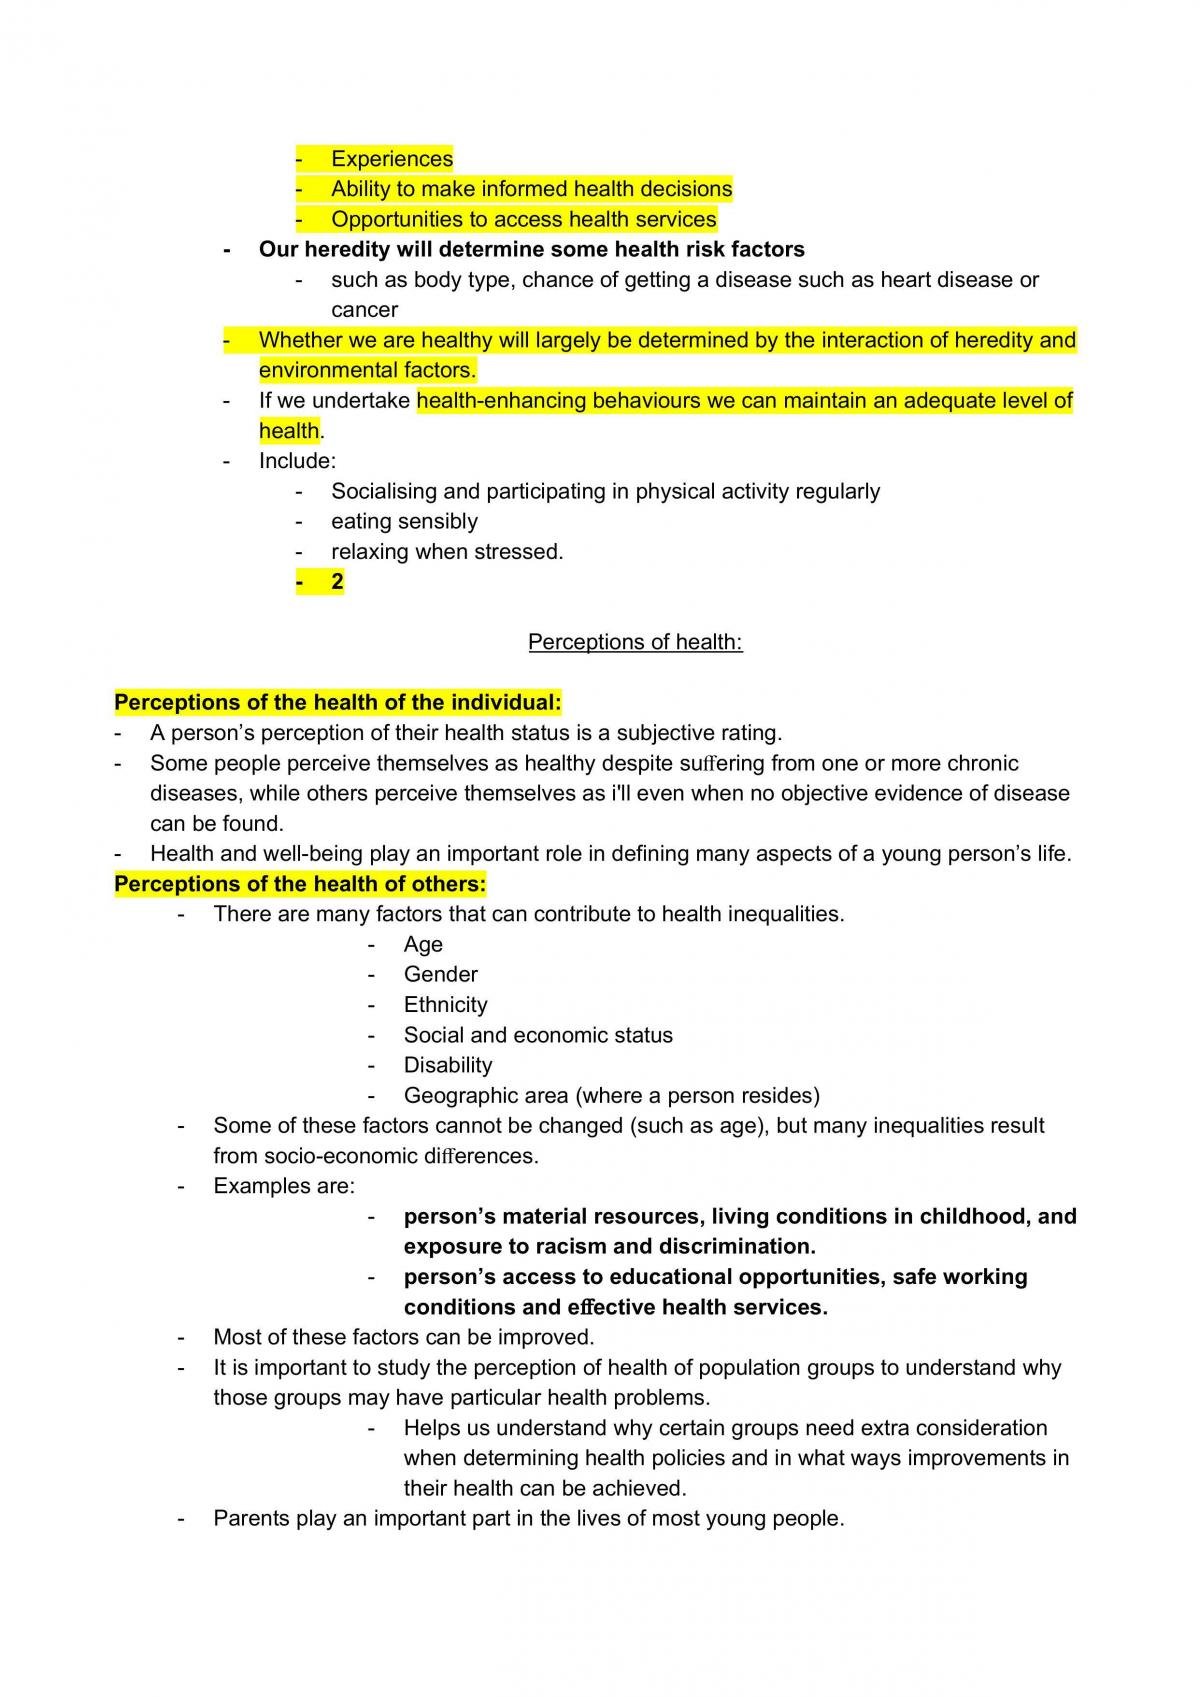 PDHPE preliminary study notes 2020 - Page 37